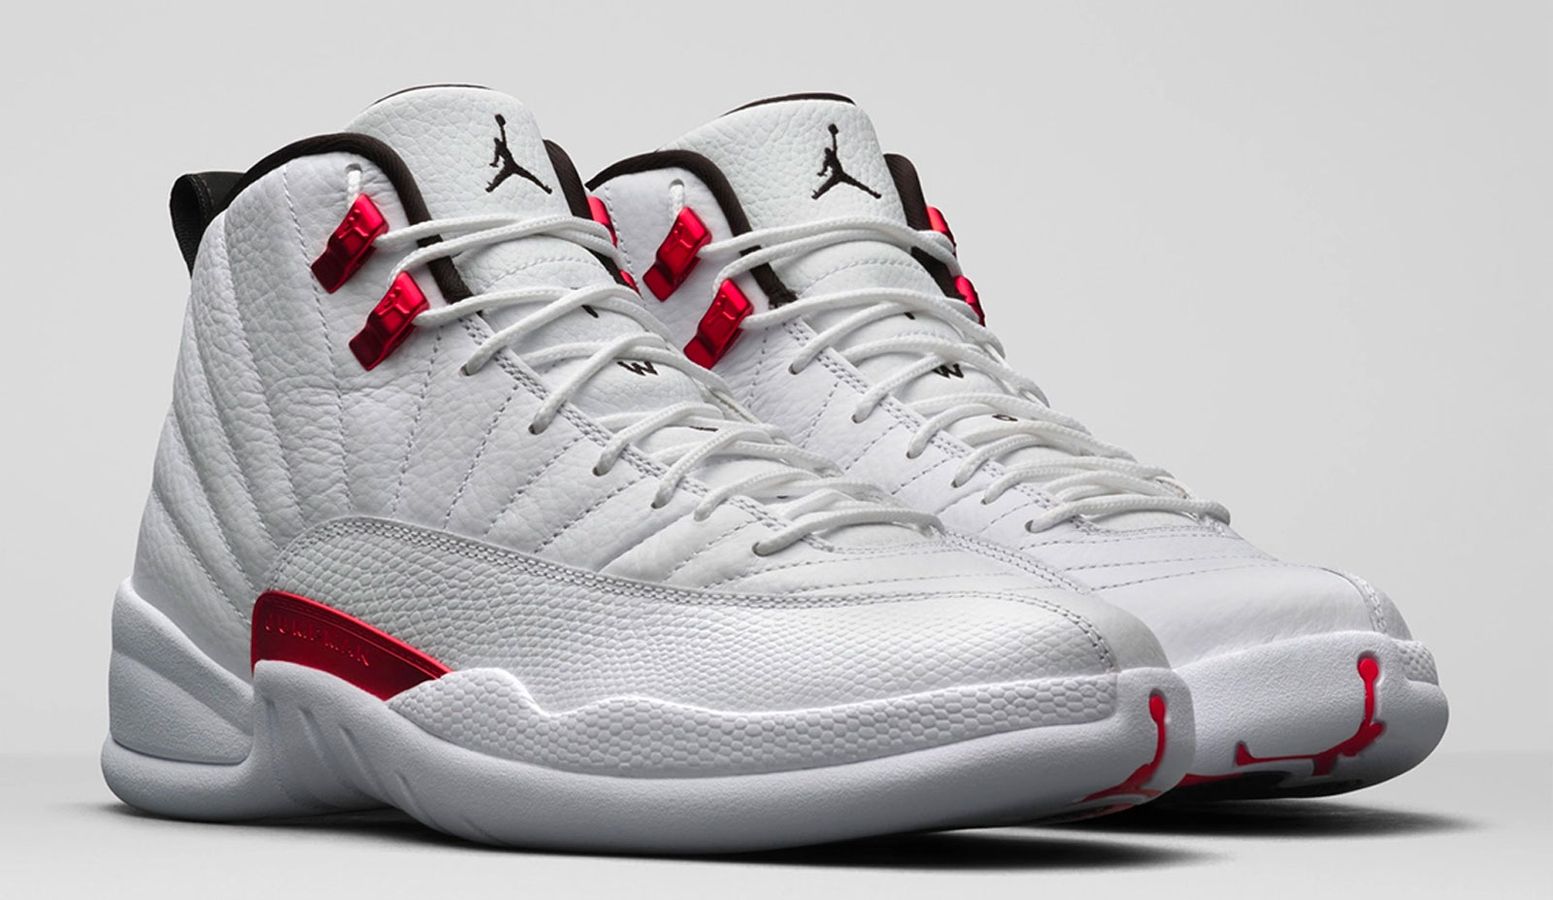 Best Air Jordan 12 colorways "Twist" product image of a pair of white sneakers with red accents.